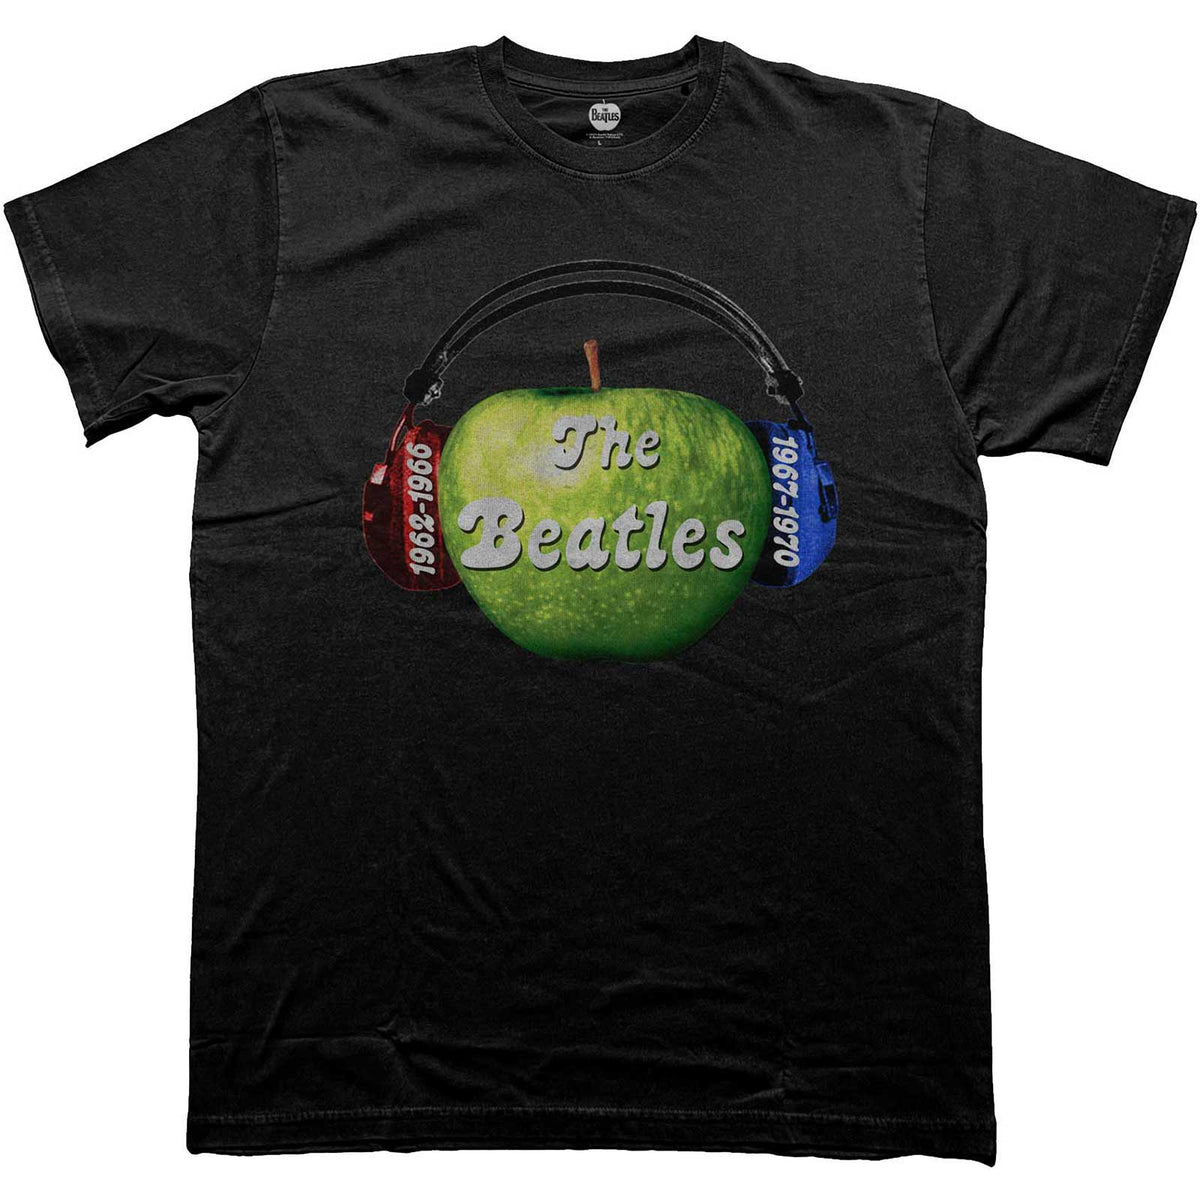 The Beatles T-Shirt - Listen To The Beatles - Unisex Official Licensed Design